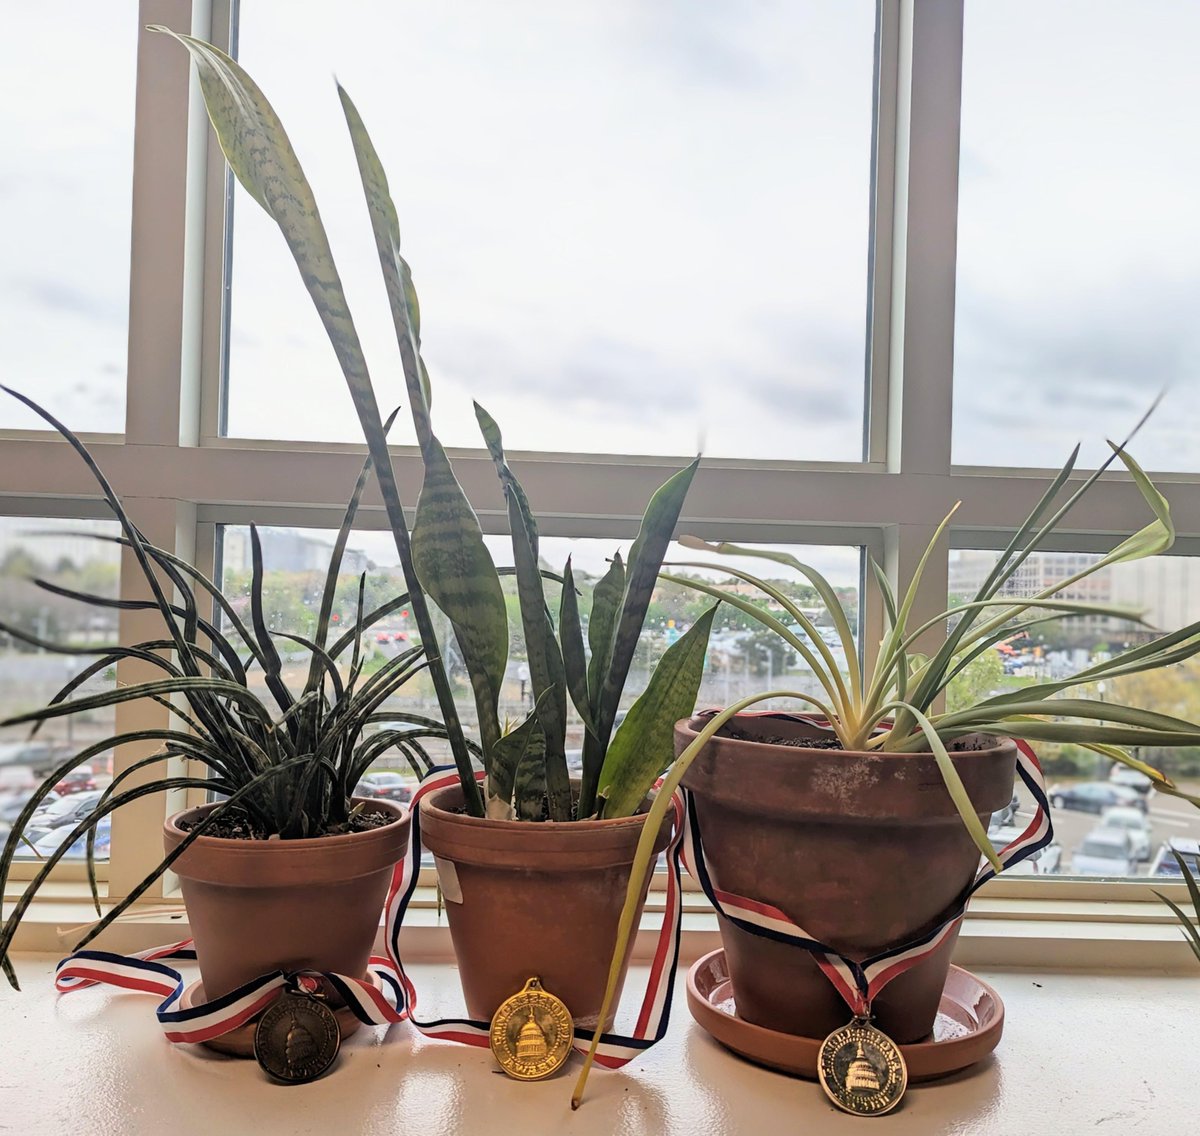 The Congressional Award celebrates #InternationalPlantAppreciationDay with our office plants! 

#plantlove 
#plantsmakepeoplehappy